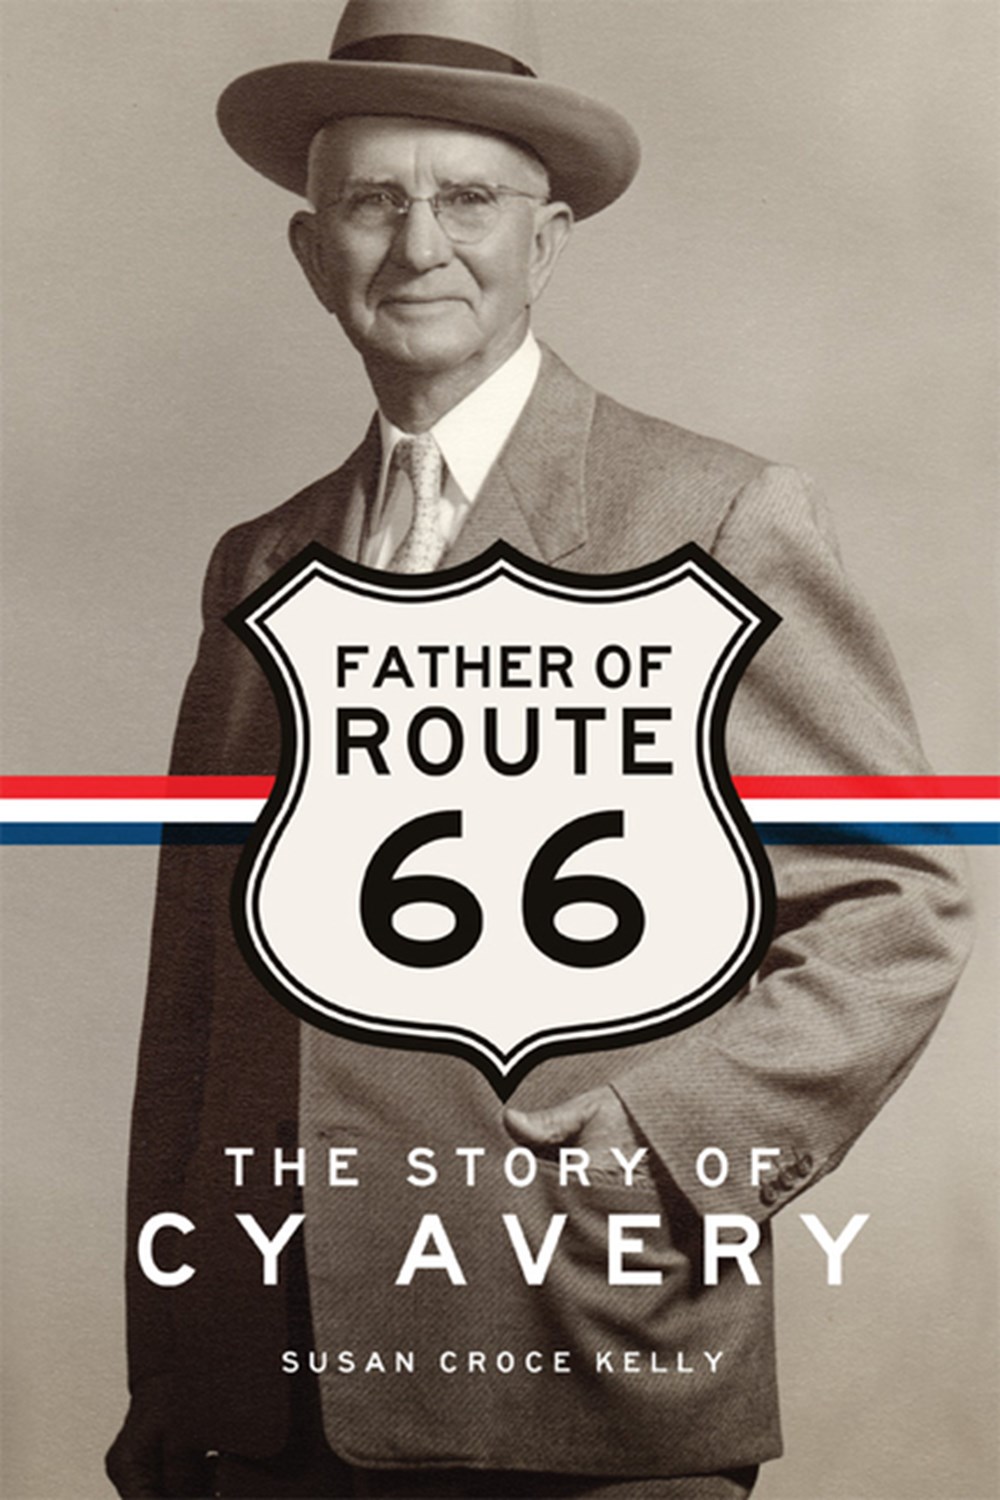 Father of Route 66 The Story of Cy Avery